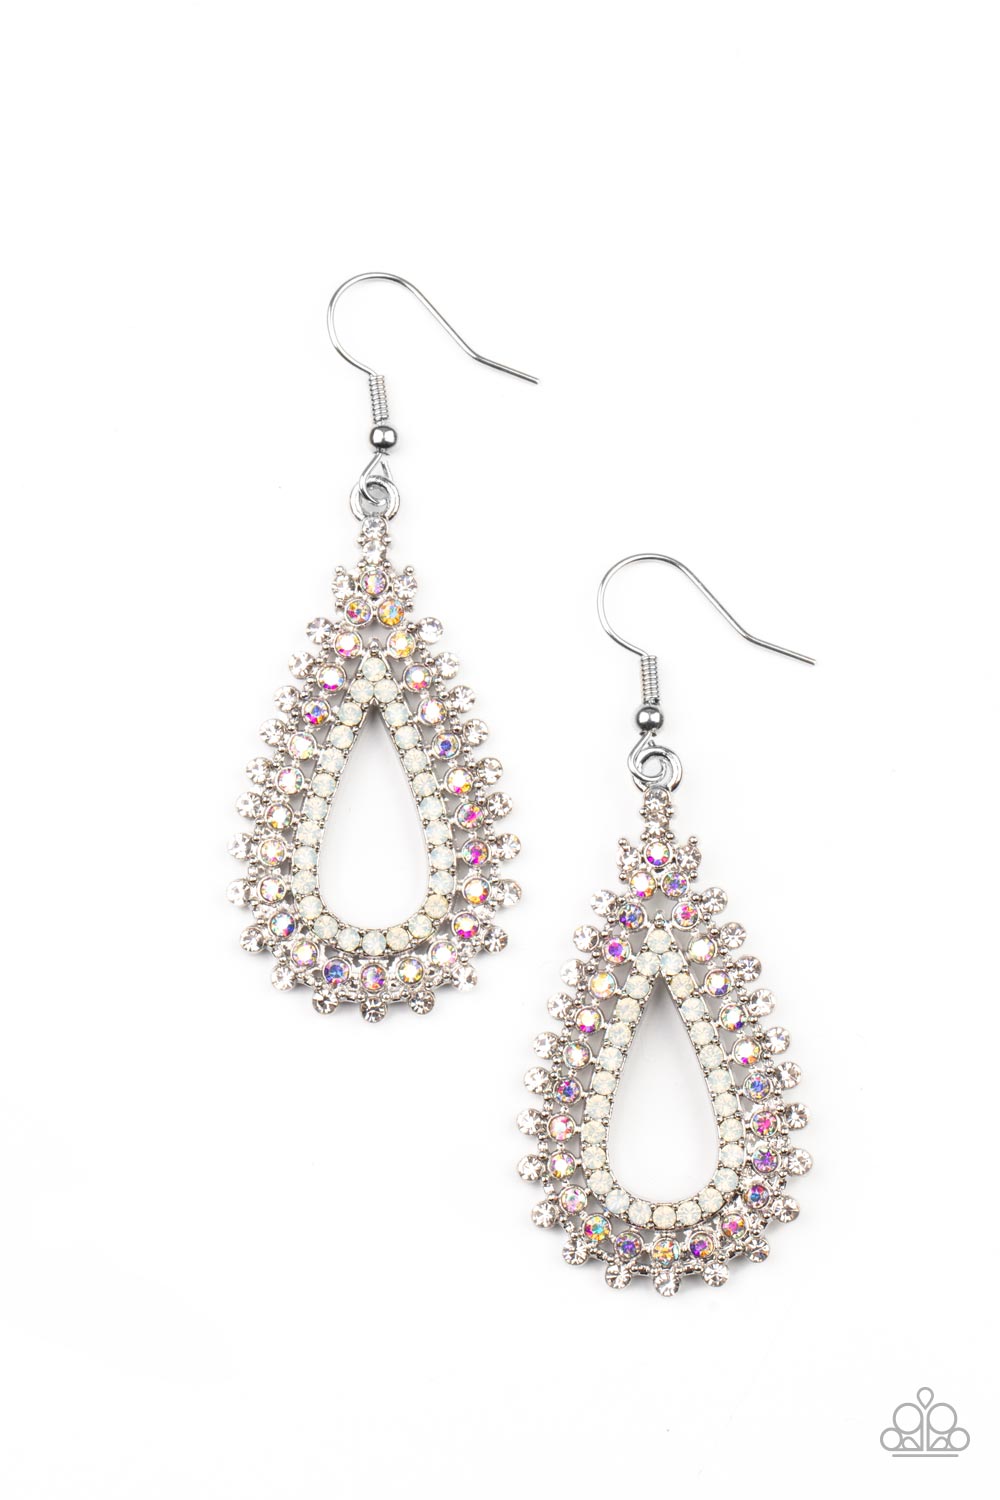 Paparazzi The Works - Multicolor Earrings White, iridescent, and opal rhinestones stack into a solitaire sparkly teardrop frame for a glamorous fashion. Earring attaches to a standard fish hook earring backs. Sold as one pair of multicolor earrings. Free Shipping on orders over $75